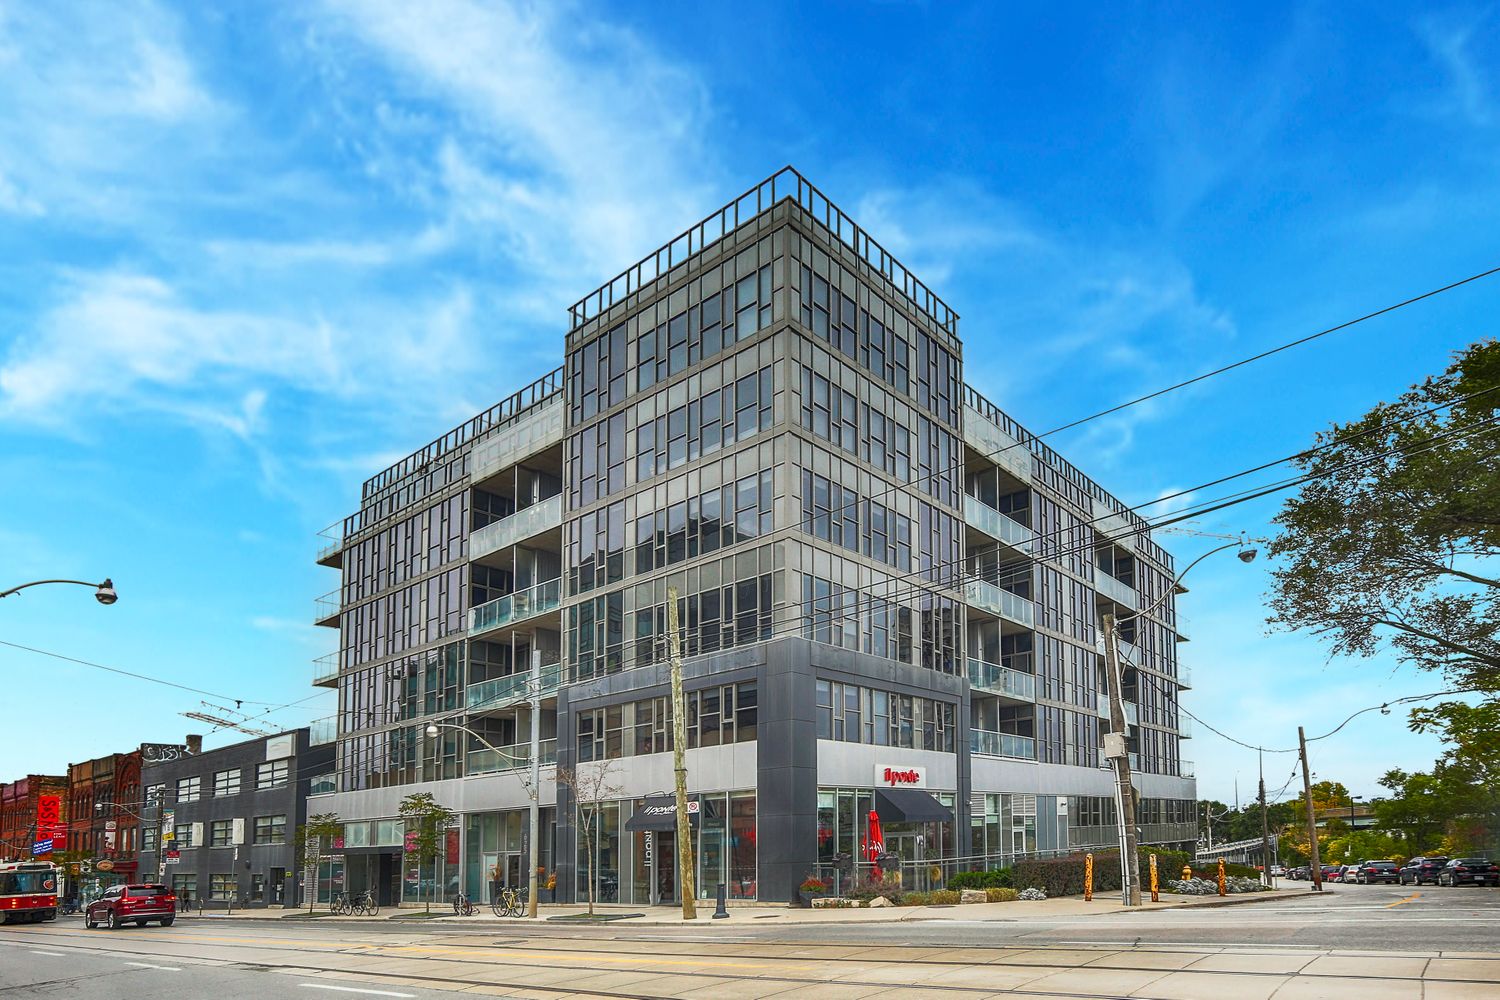 625 Queen Street E. Edge Lofts is located in  East End, Toronto - image #1 of 5